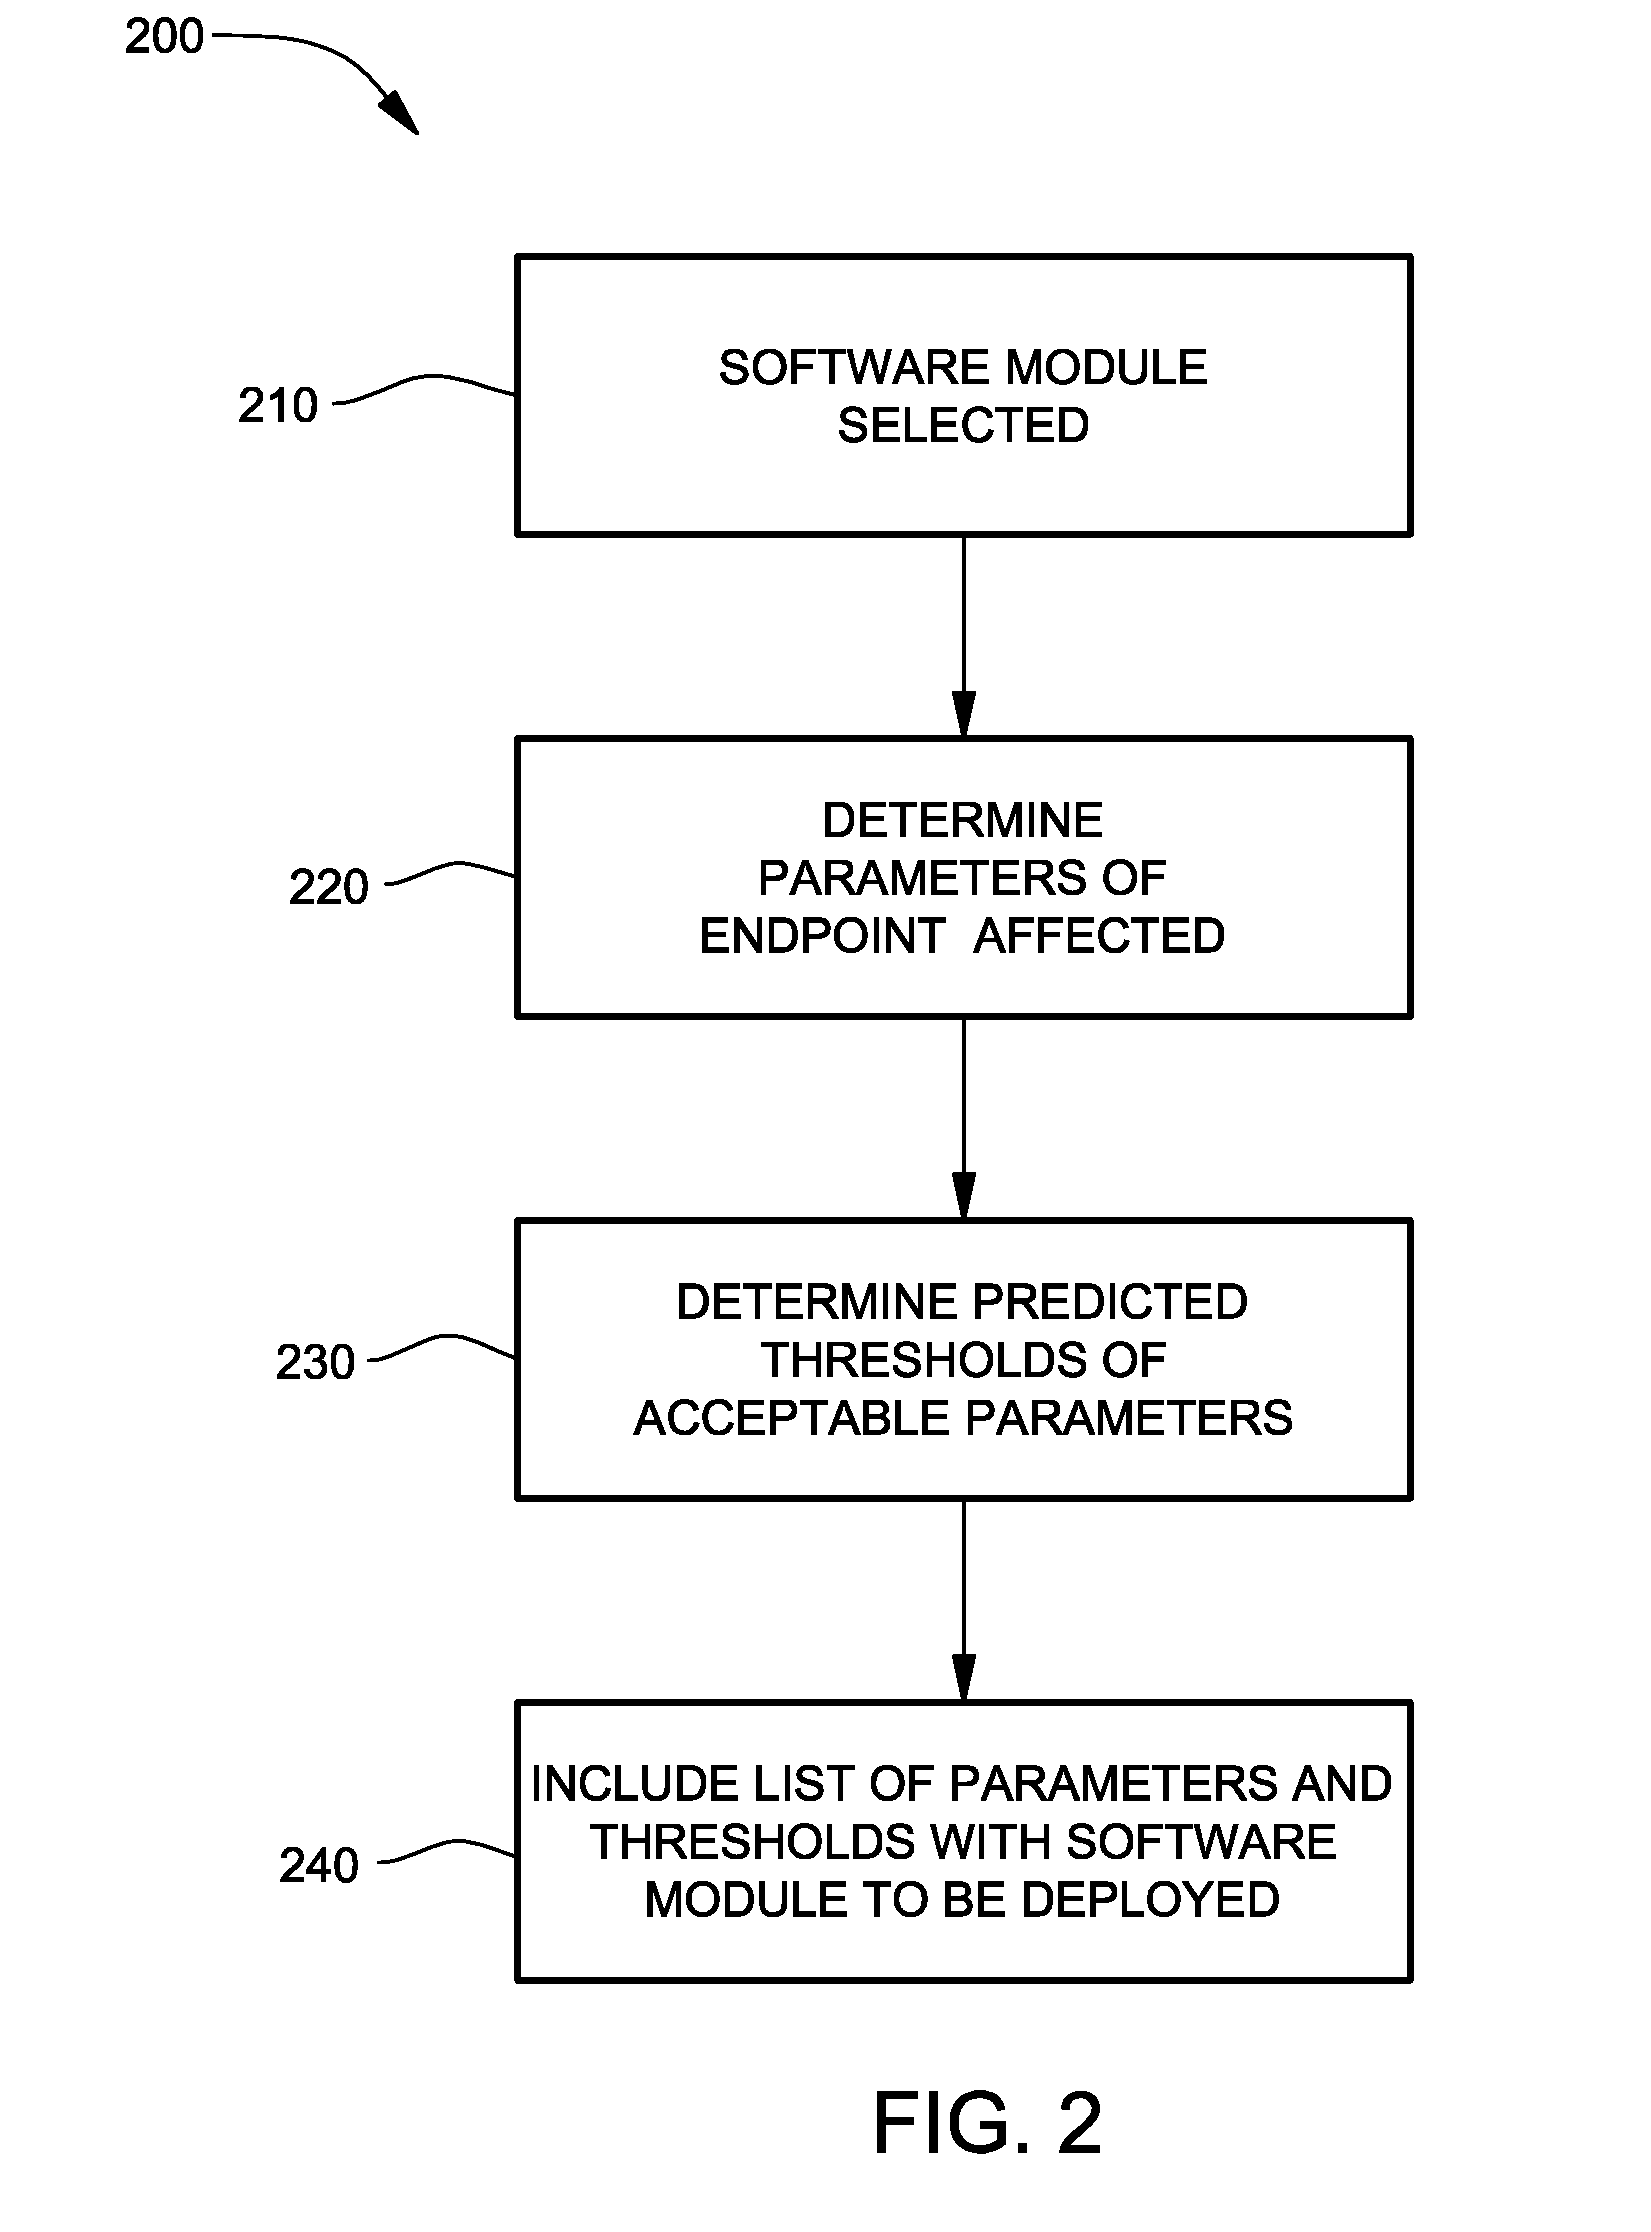 Verification of successful installation of computer software